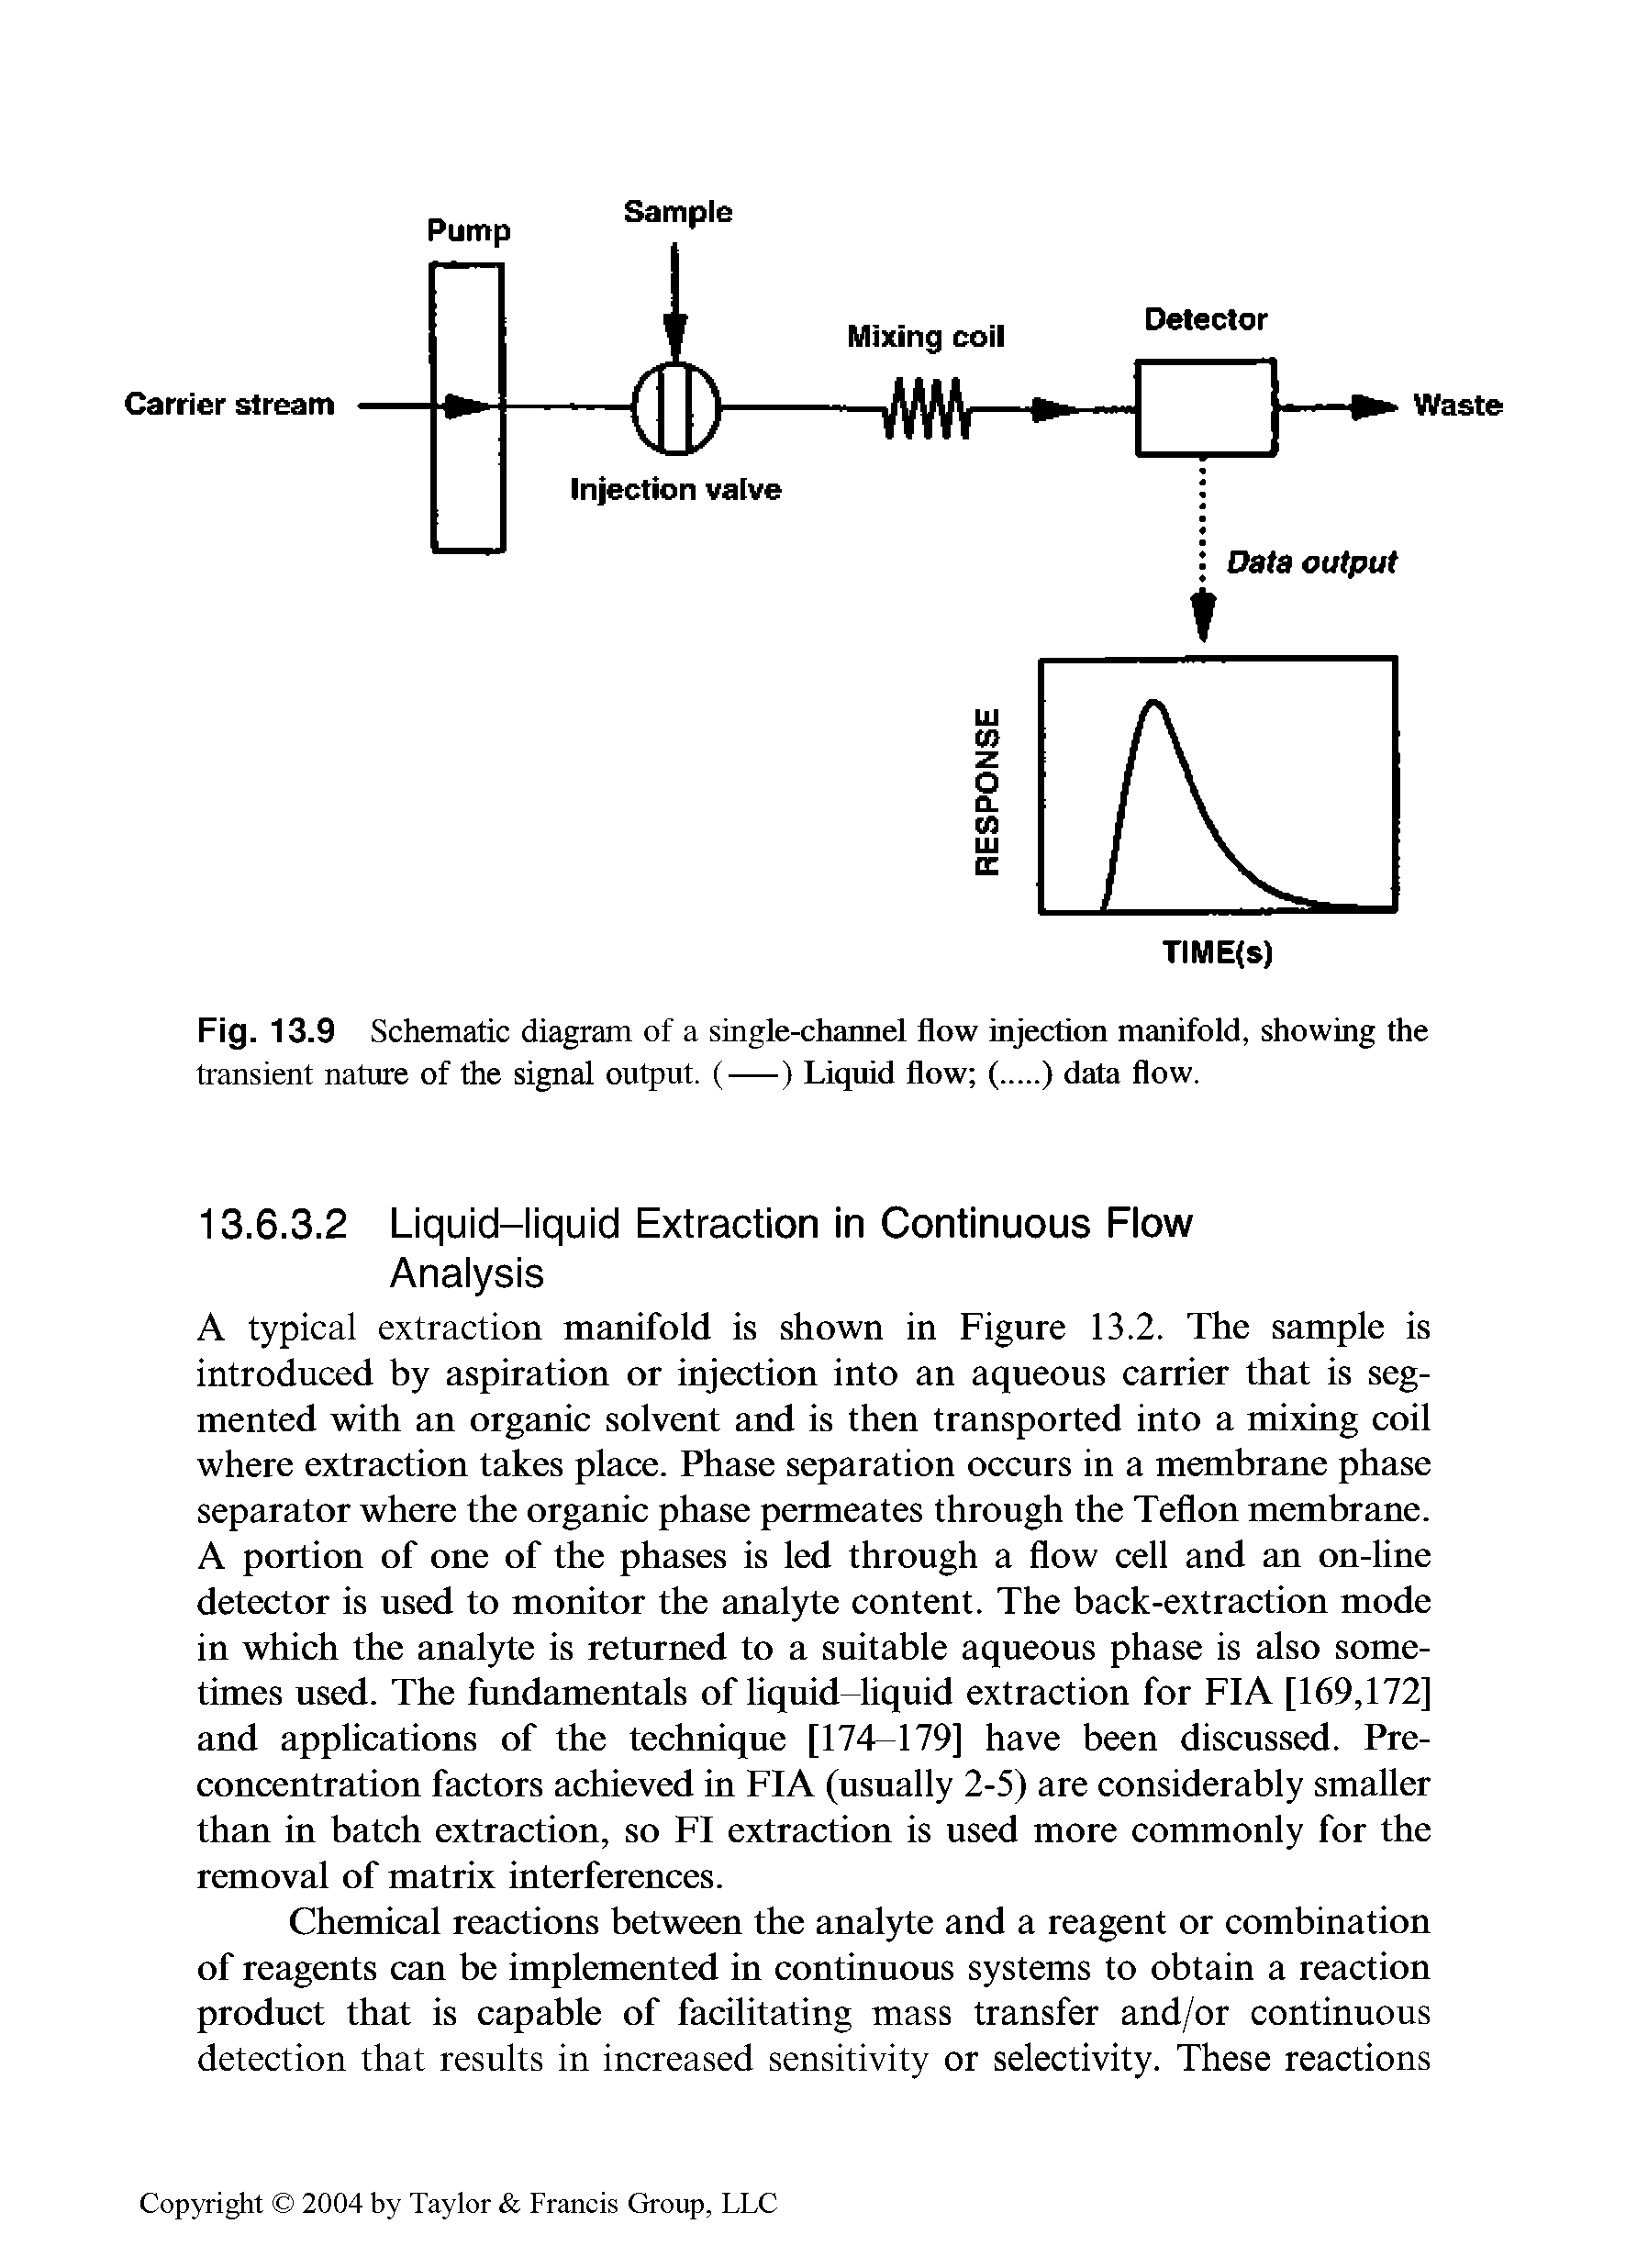 Fig. 13.9 Schematic diagram of a single-channel flow injection manifold, showing the transient nature of the signal output. (-) Liquid flow (...) data flow.